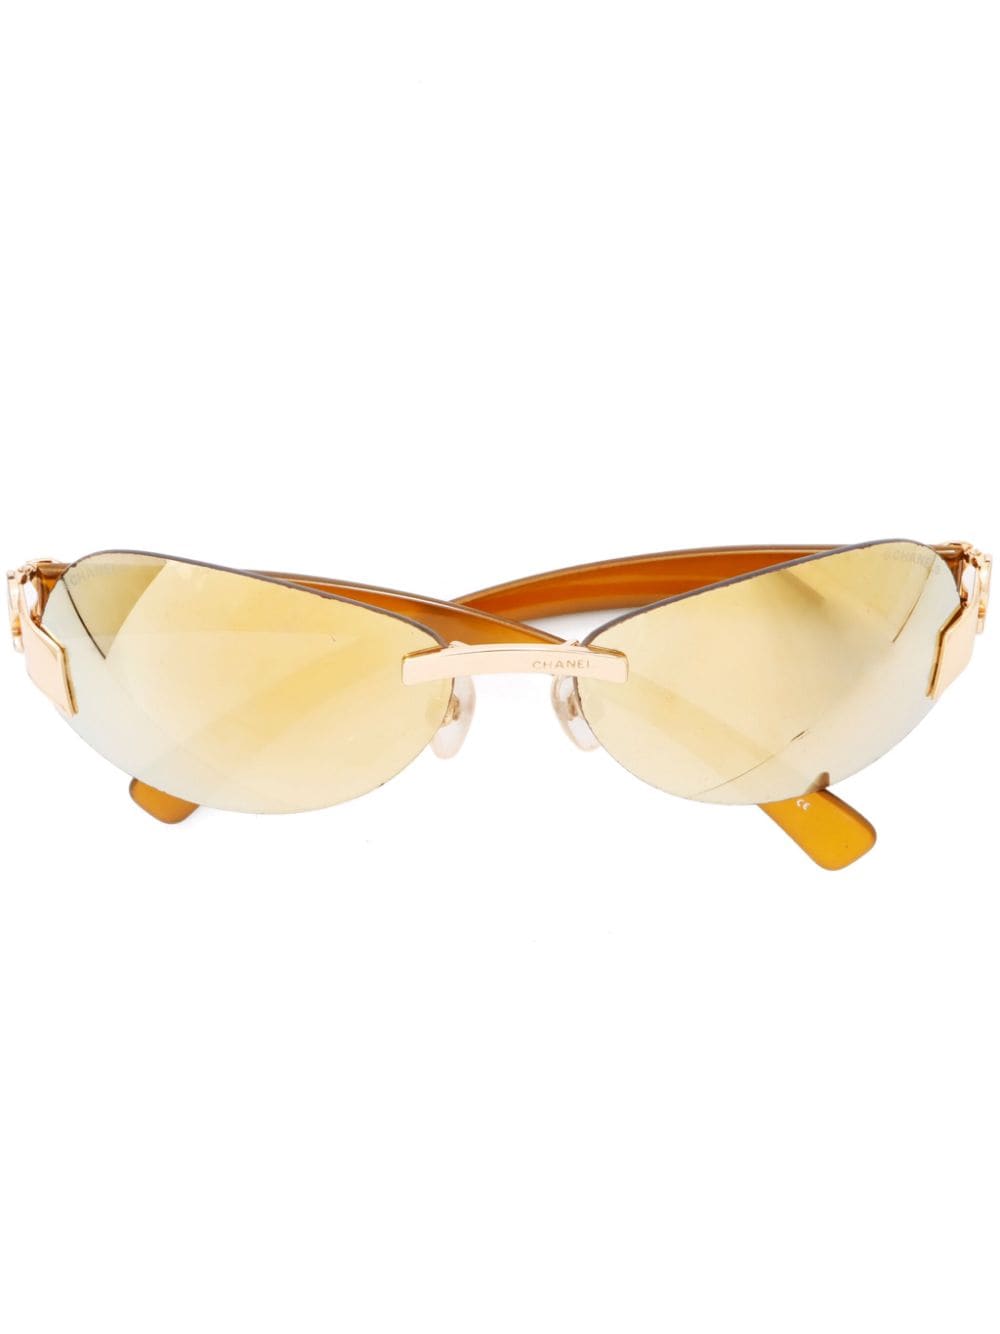 CHANEL Pre-Owned 2000 CC oval-frame sunglasses - Yellow